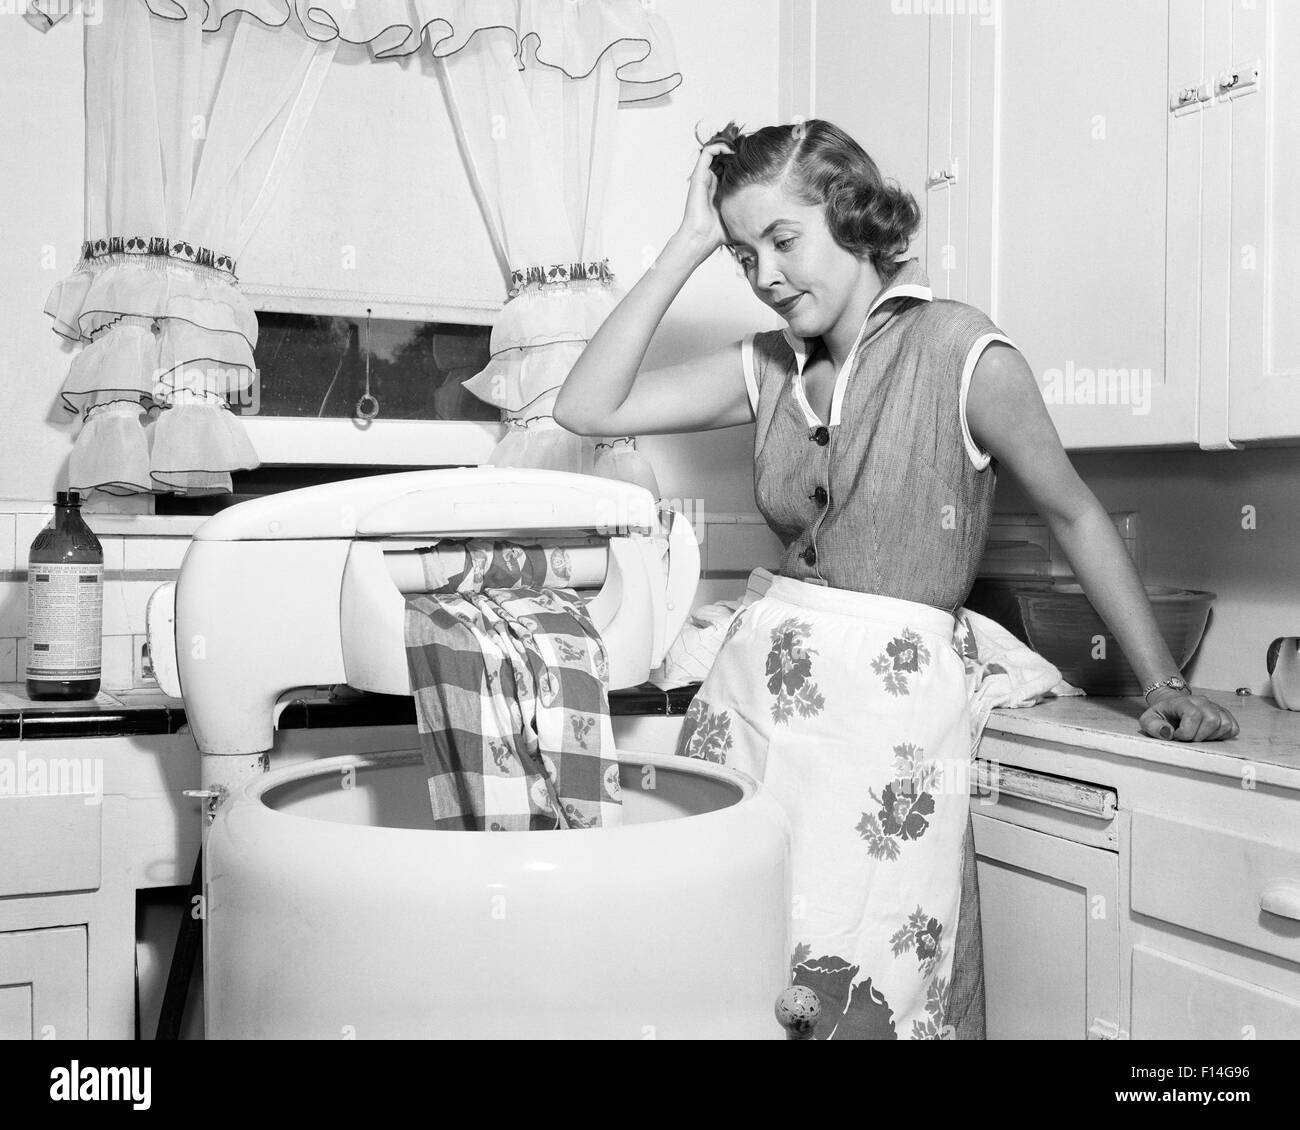 1950s FRUSTRATED HOUSEWIFE WITH JAMMED WRINGER ON CLOTHES WASHING MACHINE IN KITCHEN Stock Photo